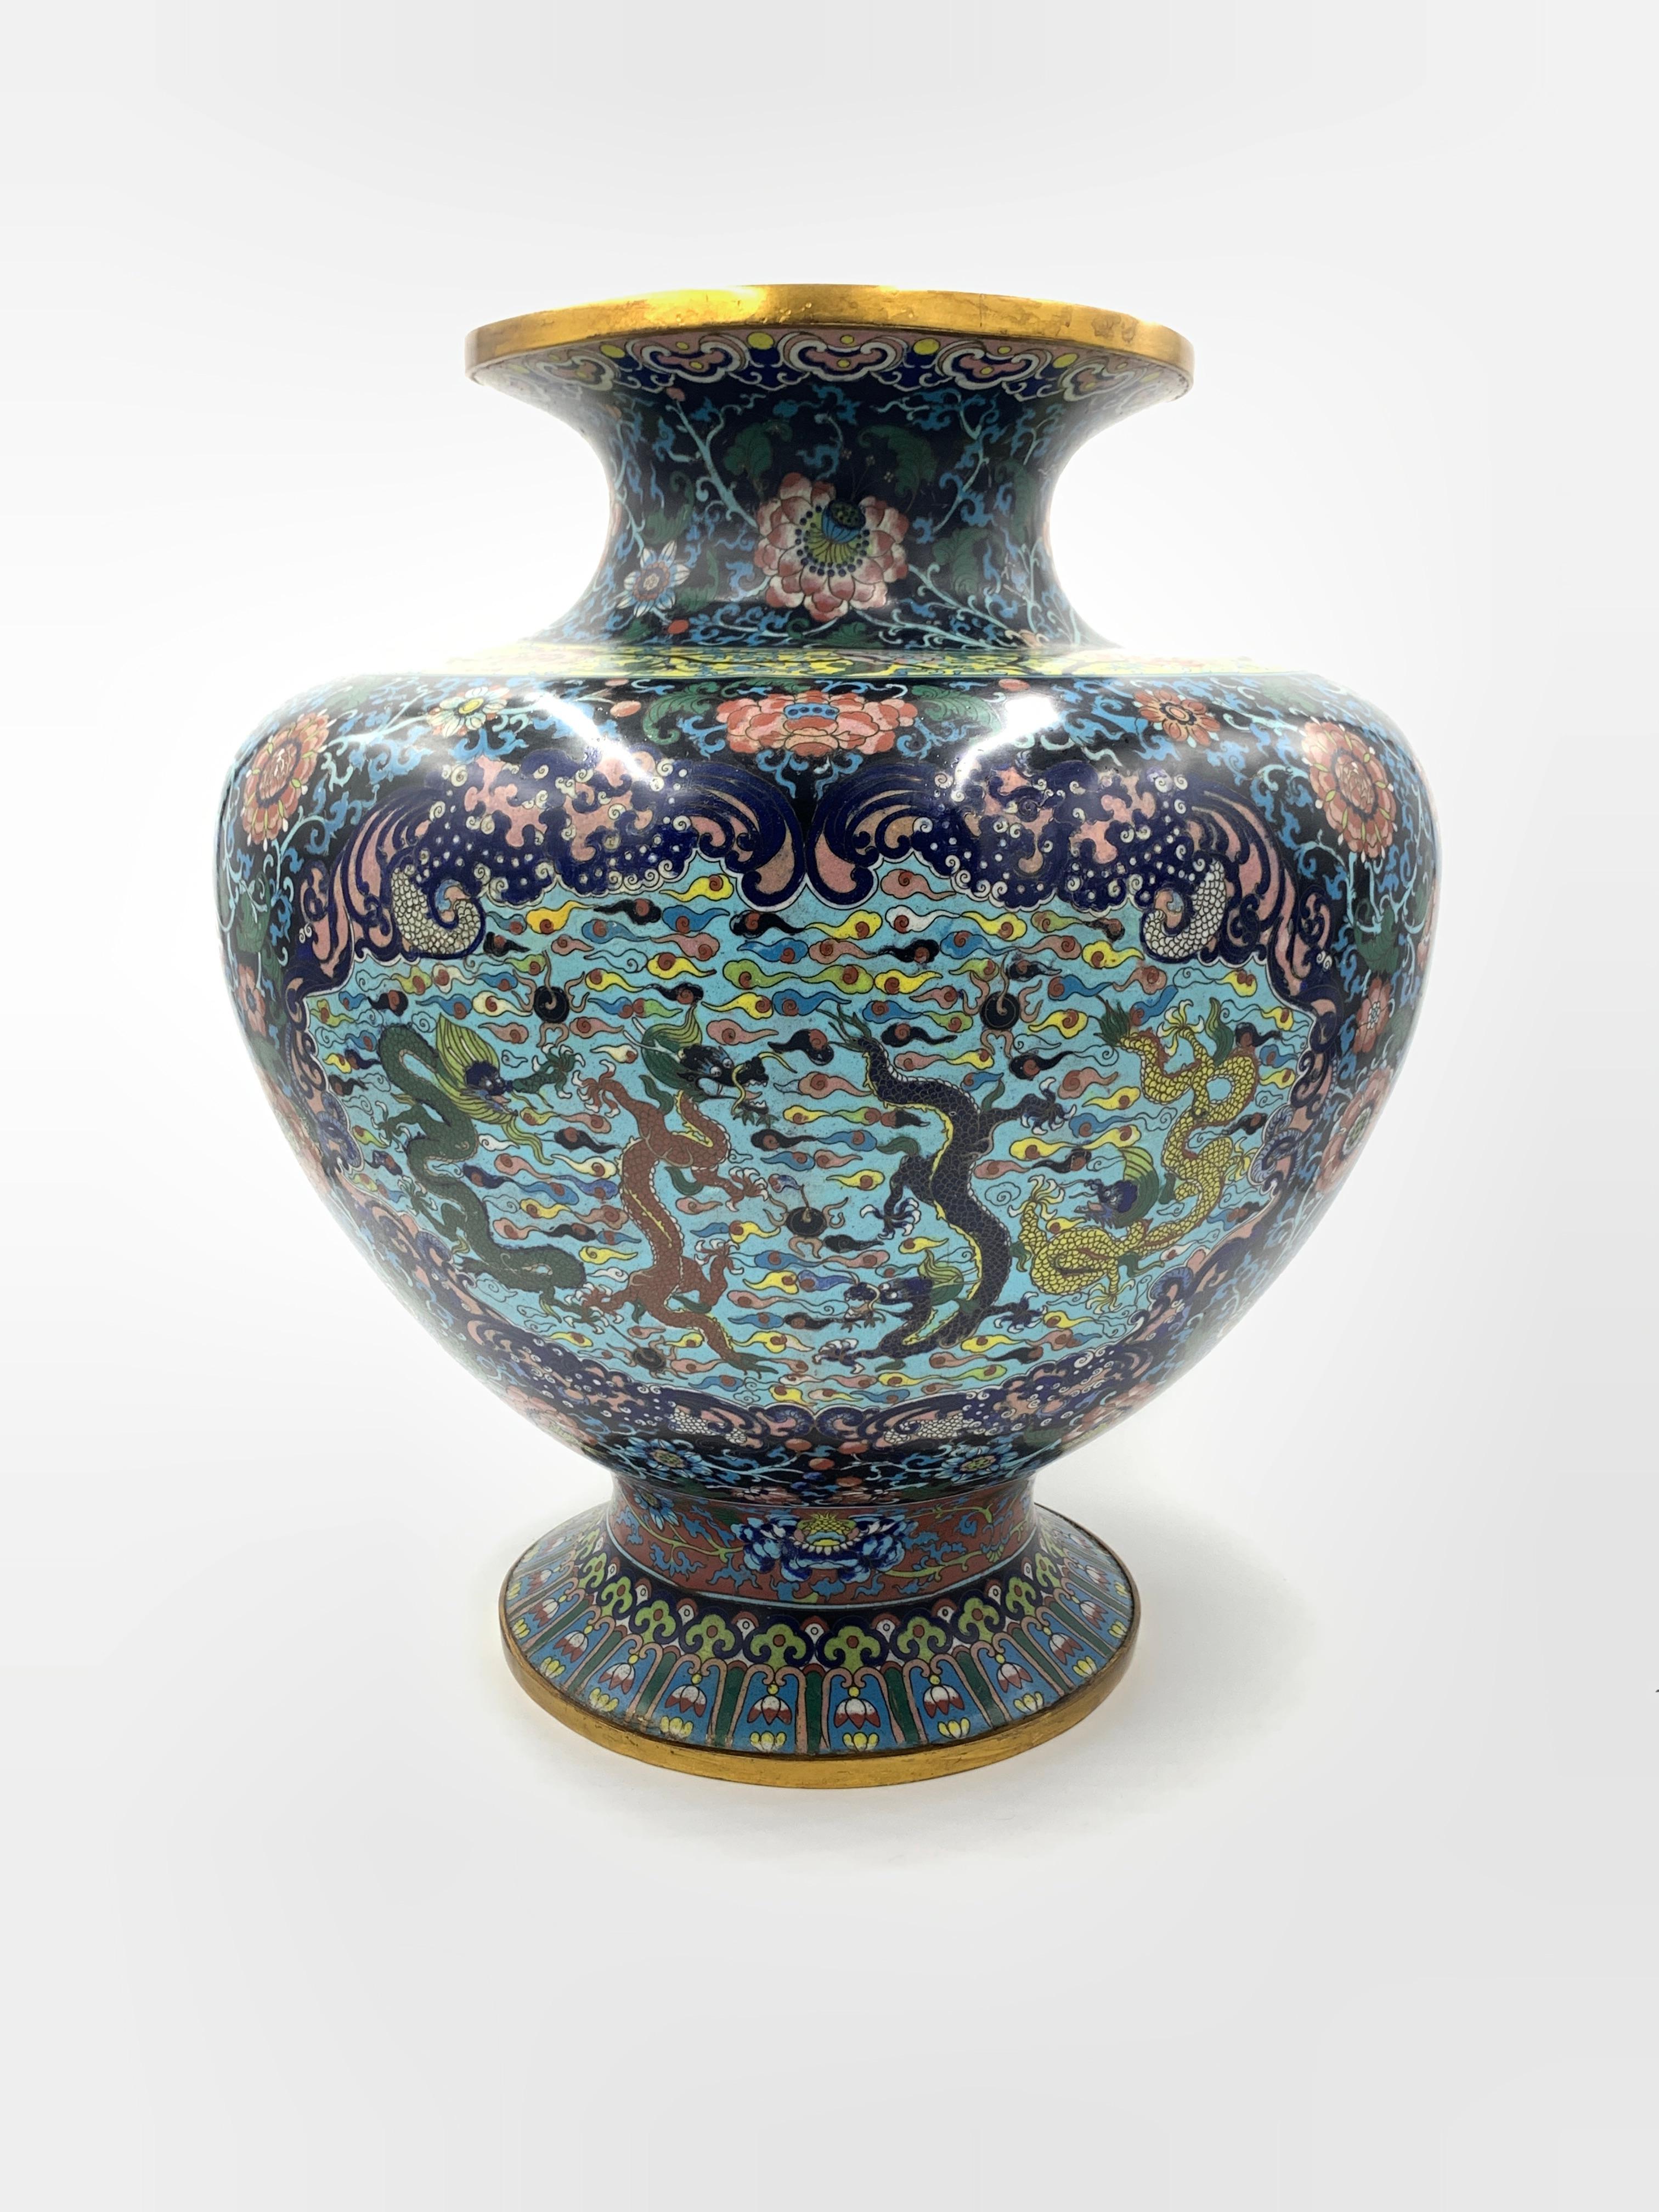 This Chinese vase is made of brass with a lovely enamel cloisonné floral design. The elegant vase sits on a narrow round base with a short funnel neck. The cloisonne floral and leaf patterns are carefully detailed and feature beautiful, vibrant, and